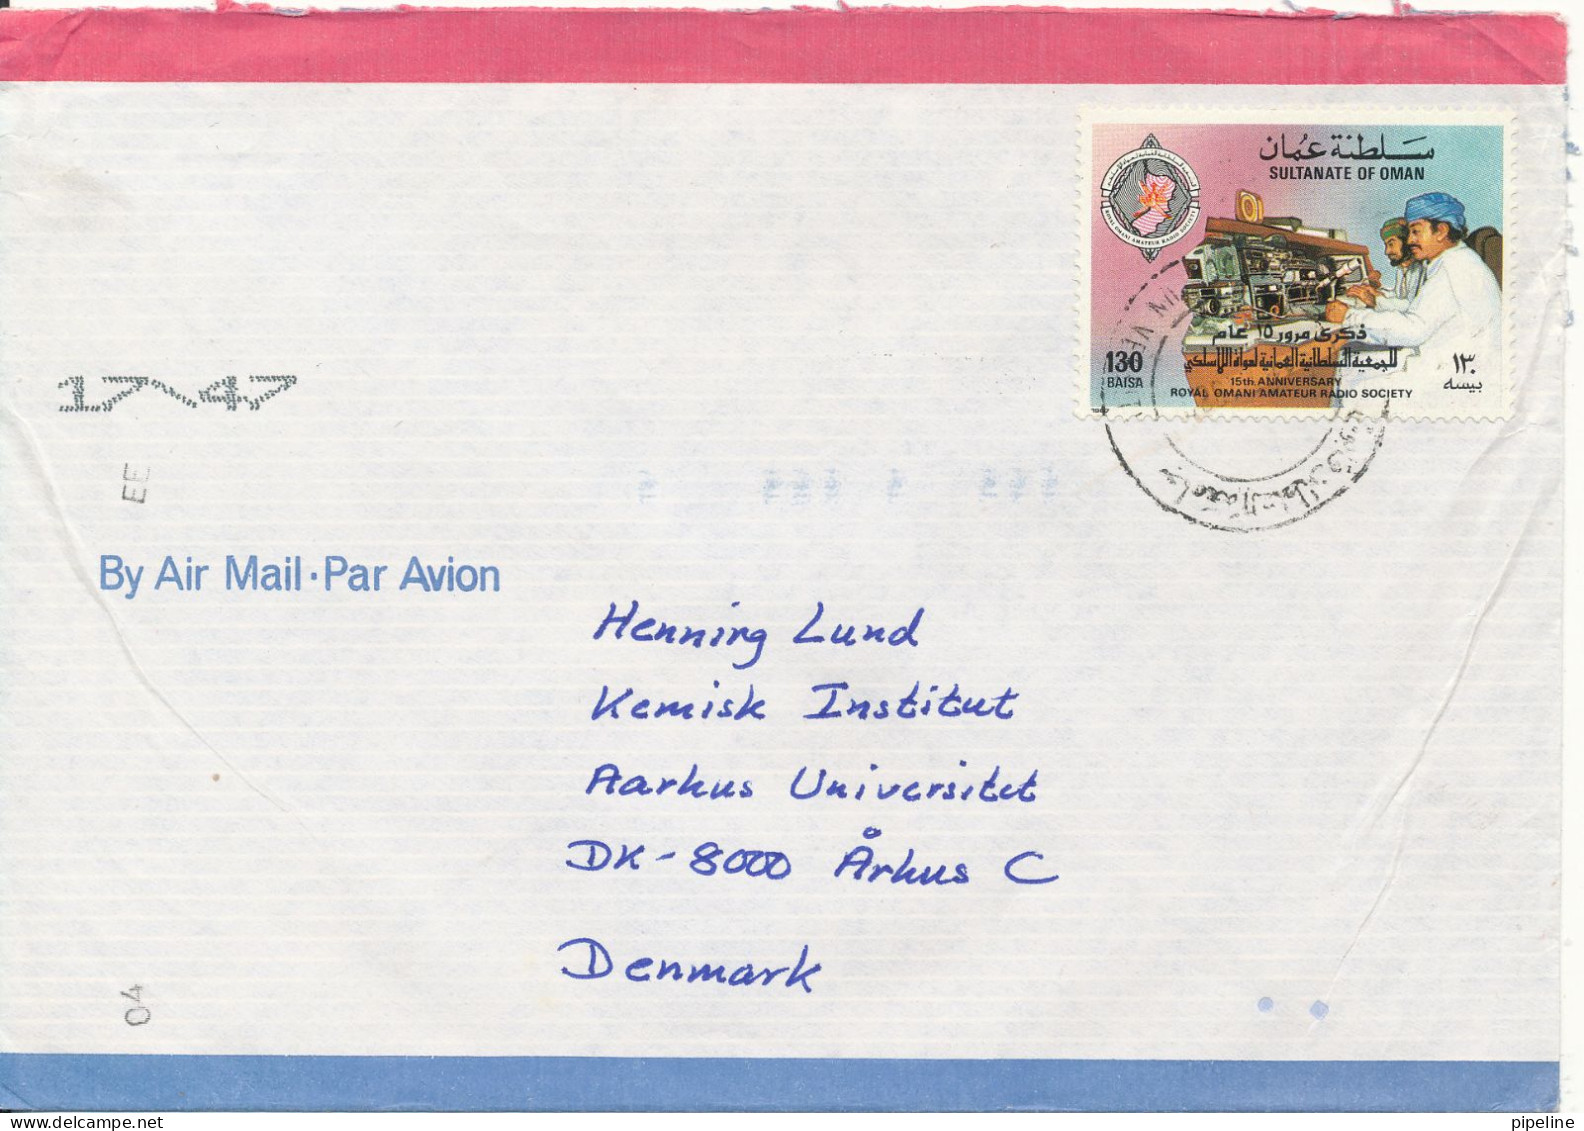 Oman Air Mail Cover Sent To Denmark Single Franked - Oman